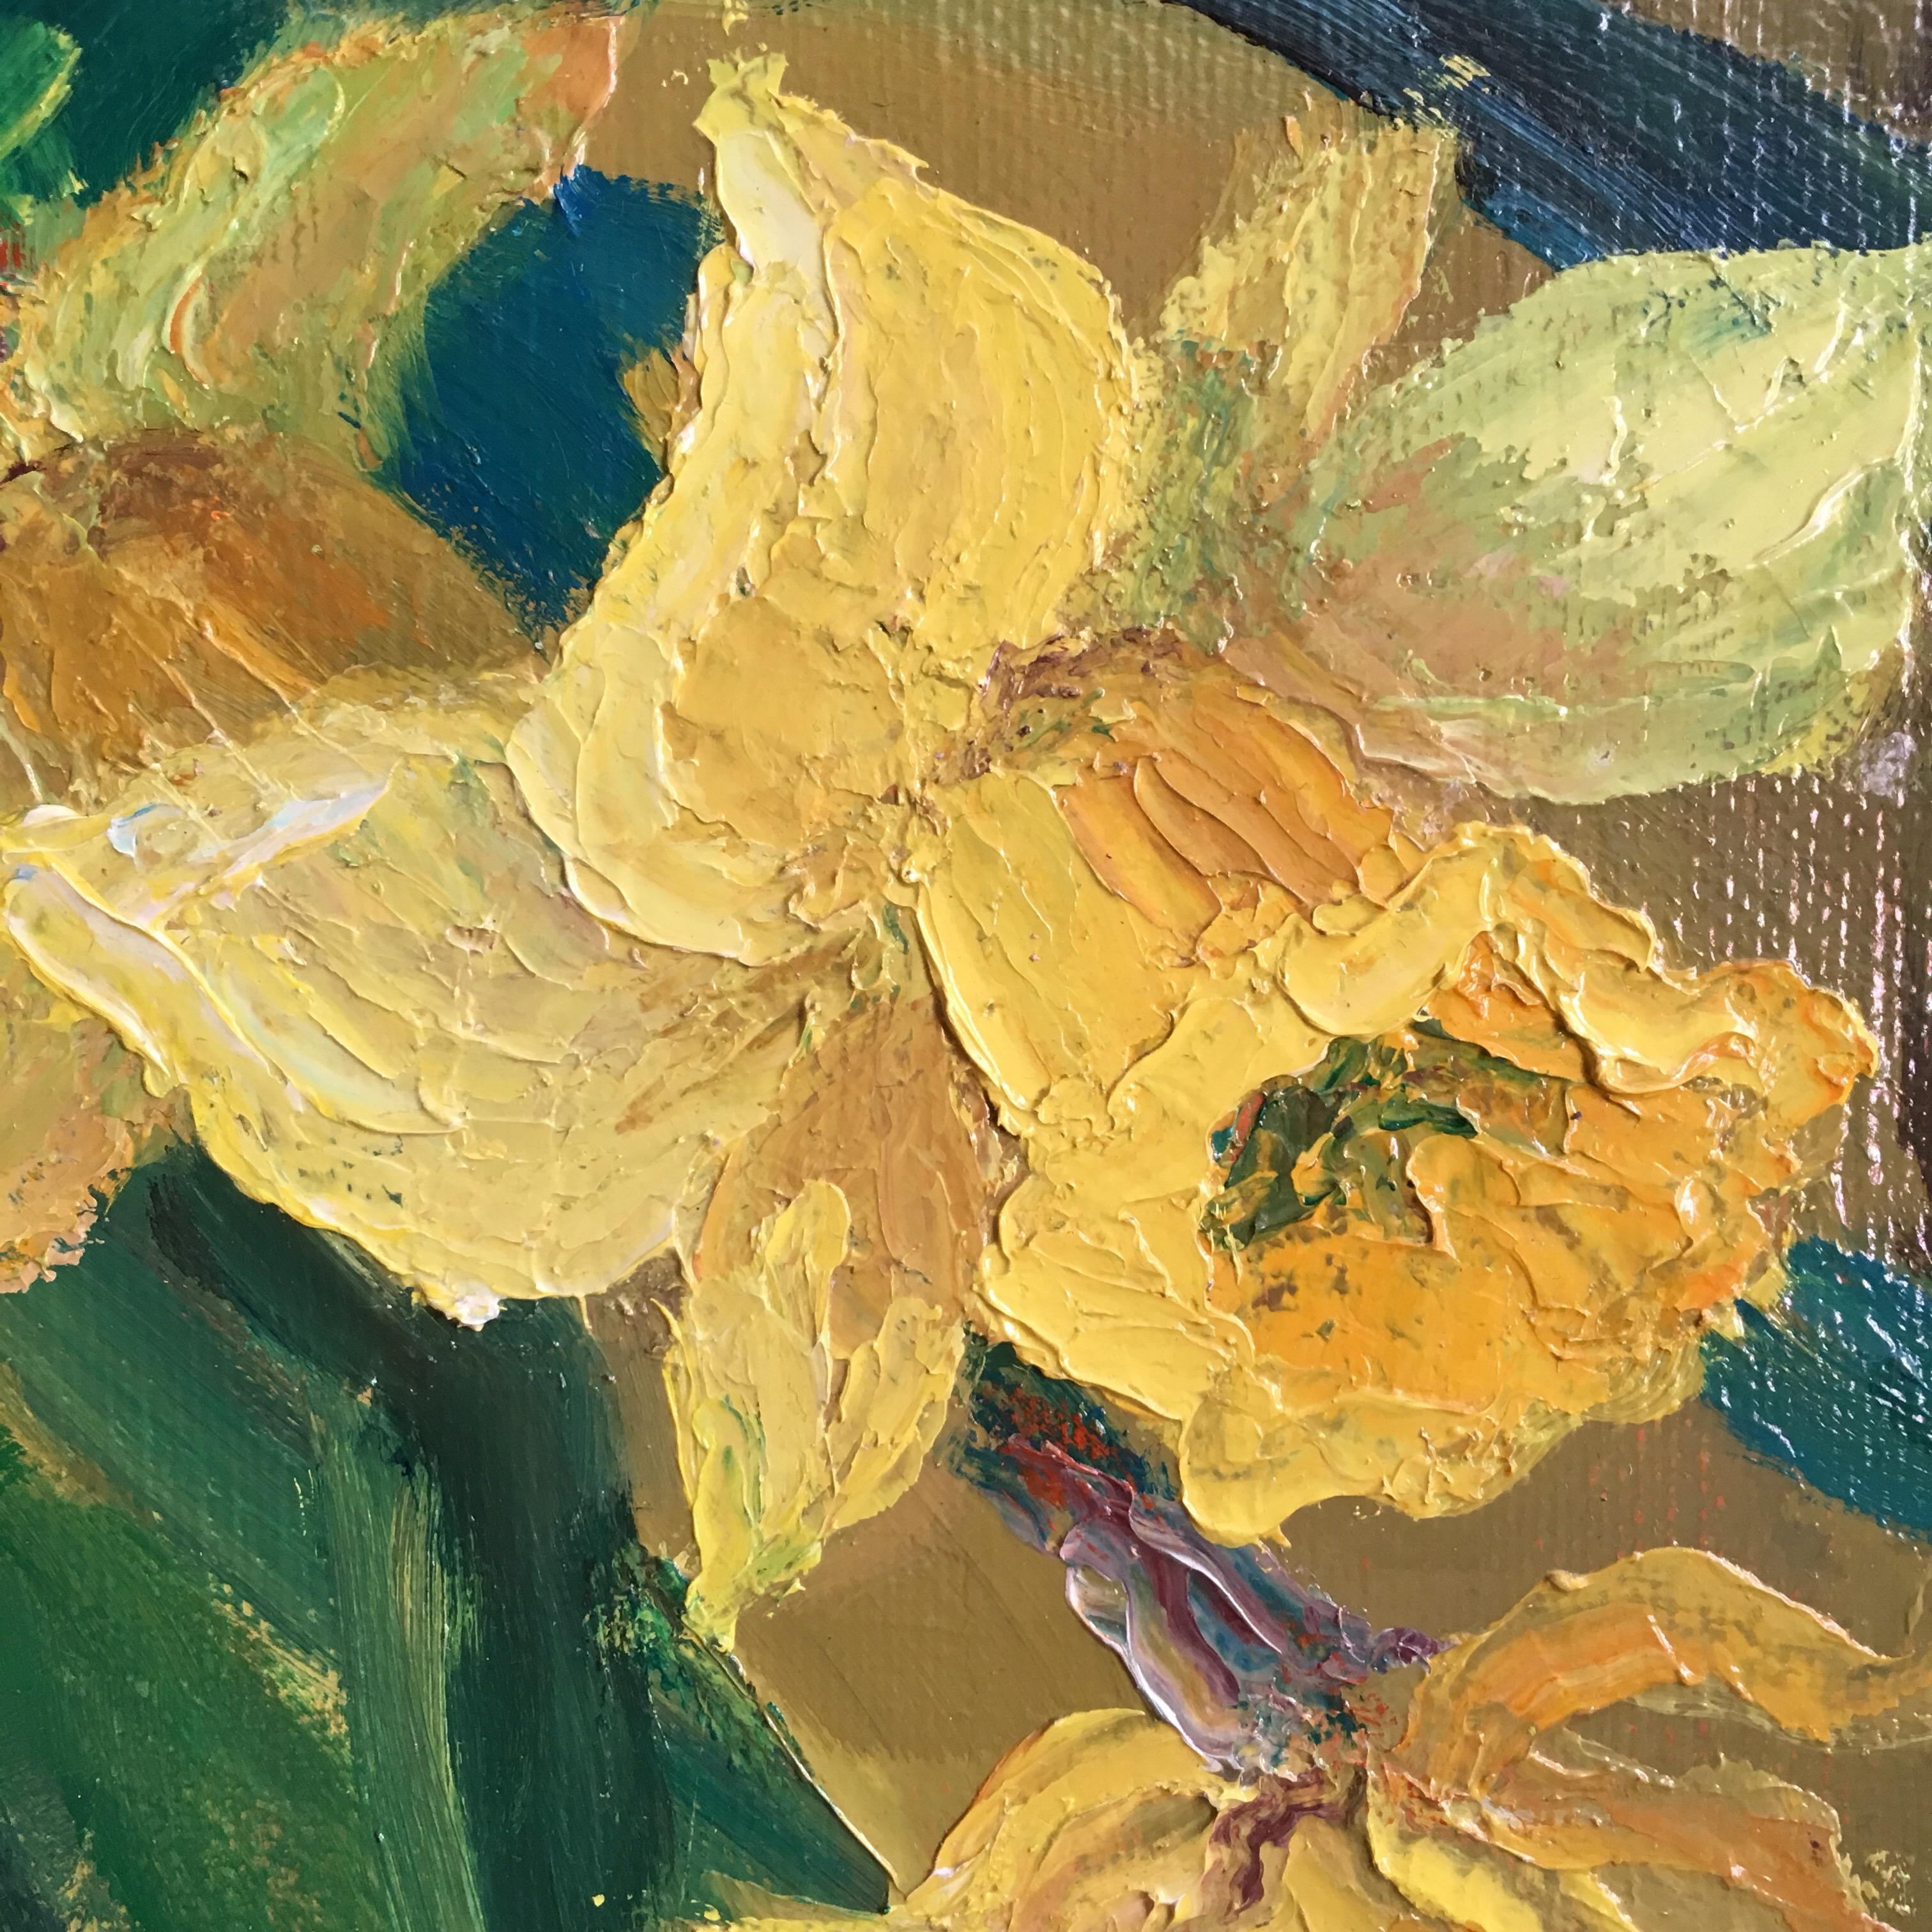 Daffodils in a Yellow Room, Oil painting, Signed
By French artist, Suzette Mezie, mid 20th Century
Signed by the artist on the right hand corner, and verso
Oil painting on canvas, unframed
Canvas size: 31.5 x 31.5 inches

Wonderfully vibrant oil